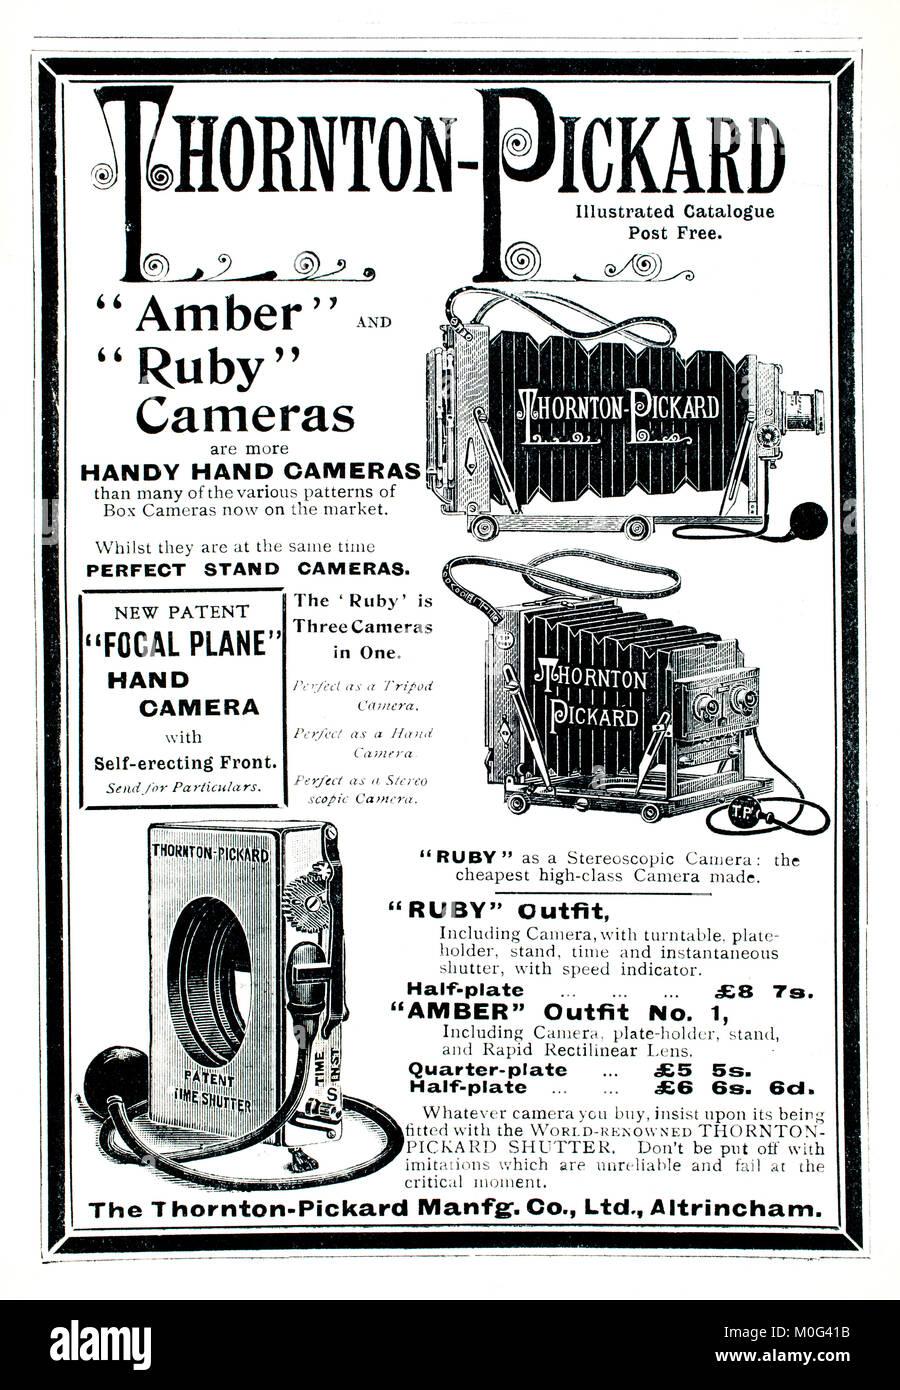 Thornton-Pickard camera and shutter advertisement from Photography In A Nutshell, by The Kernel, Iliffe & Sons, 1901 Stock Photo